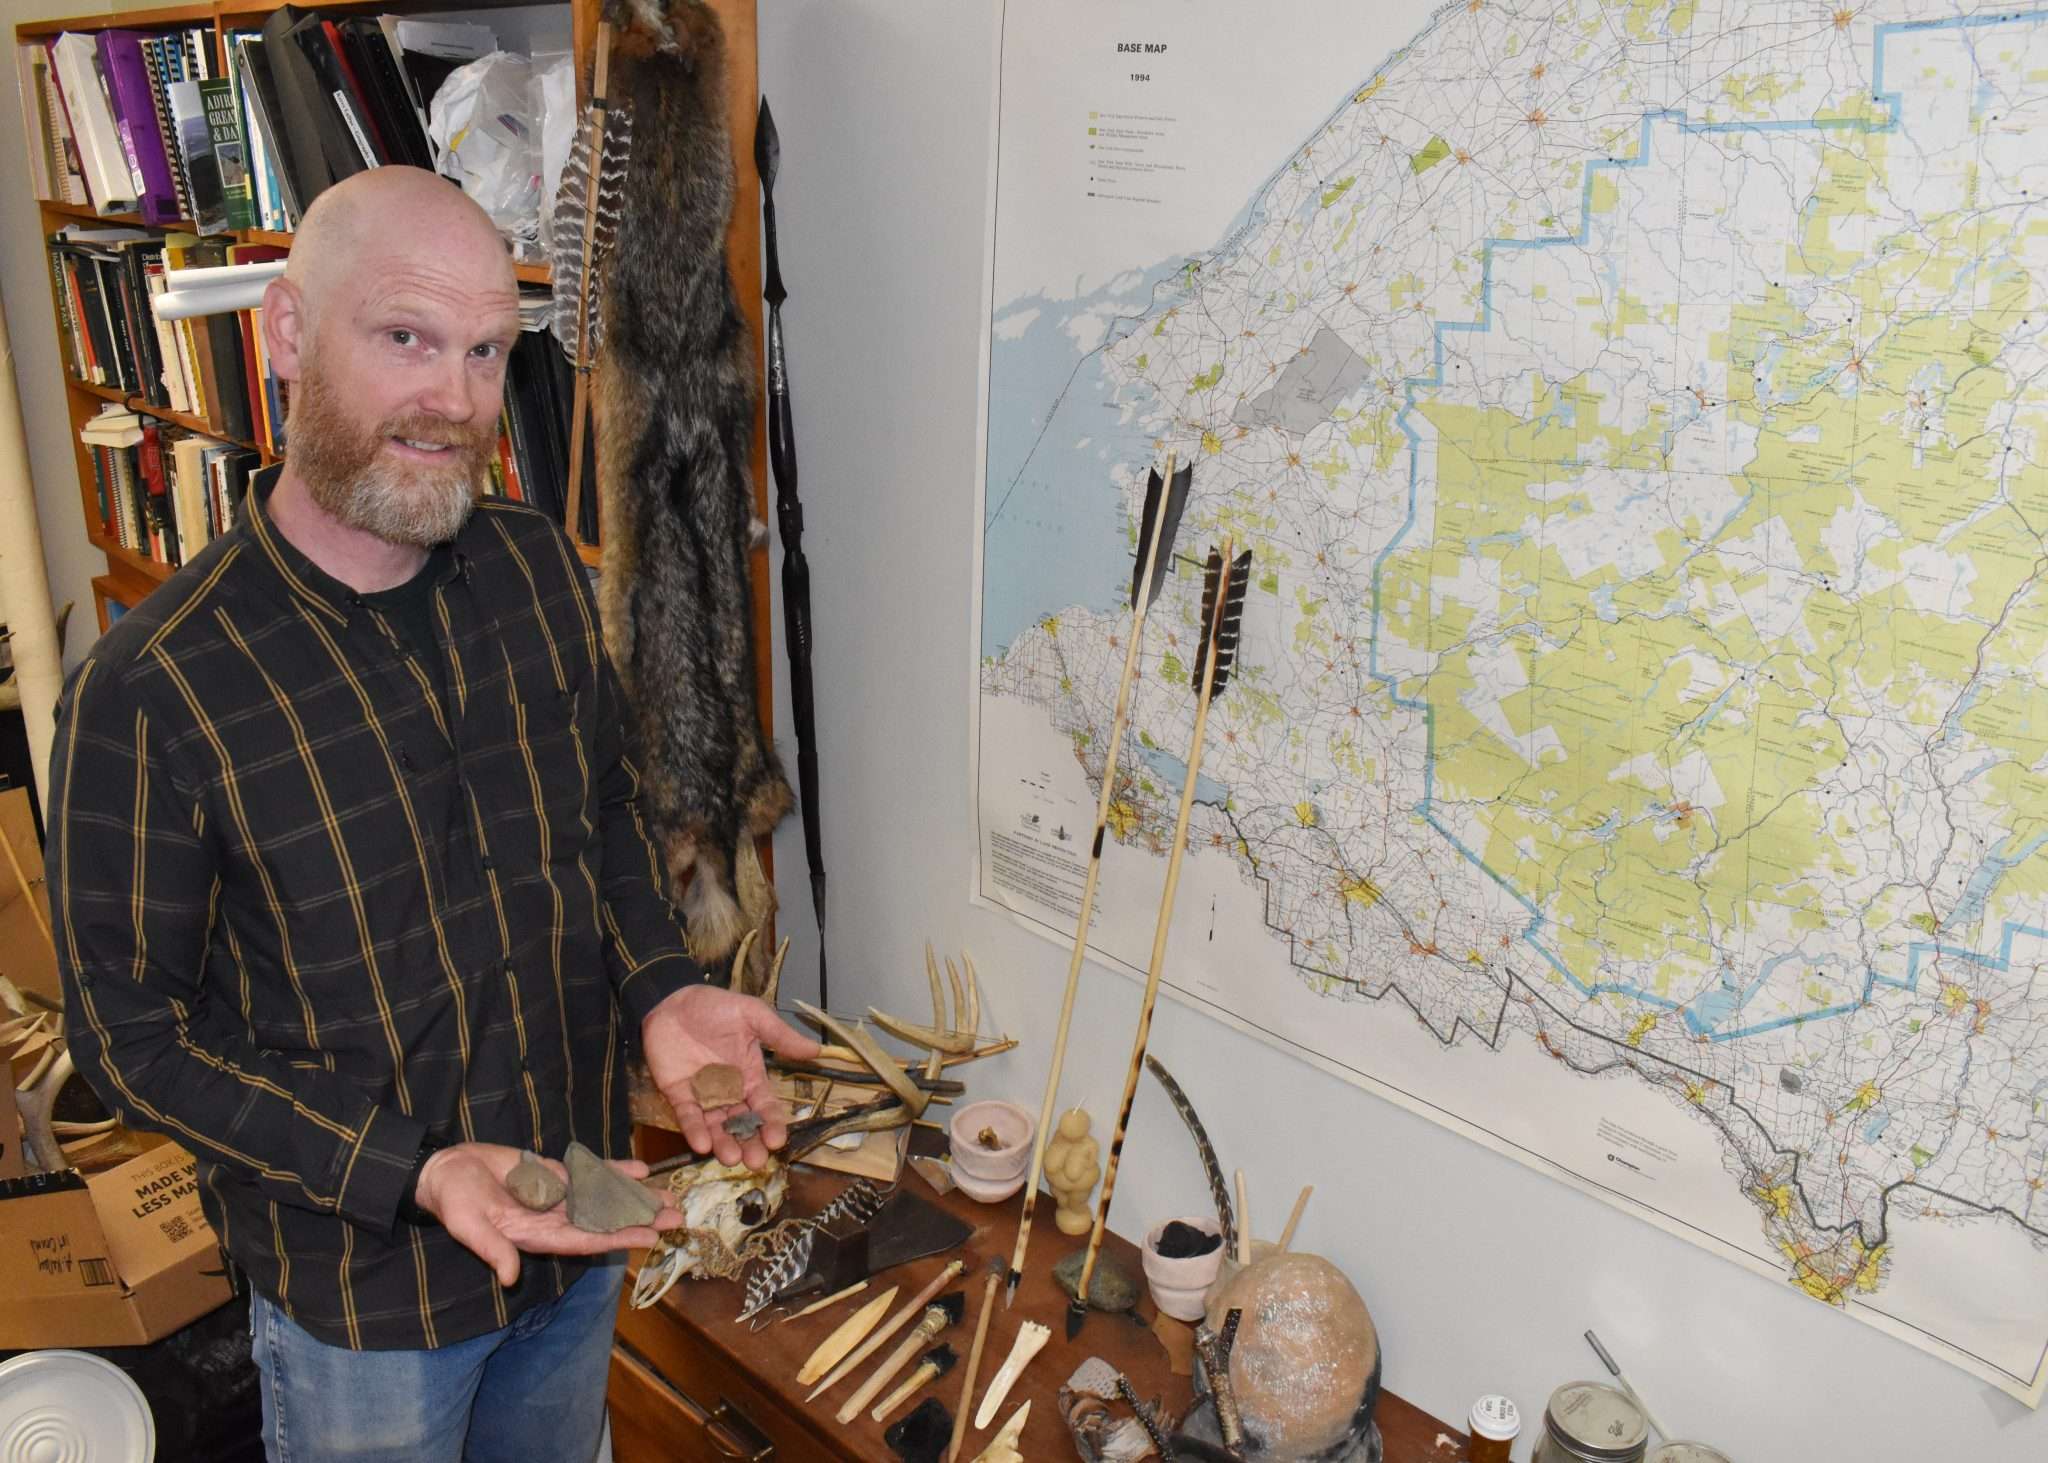 SUNY Potsdam Professor Tim Messner's collection of ancient Indigenous artifacts include items found in Tupper Lake and Speculator. 